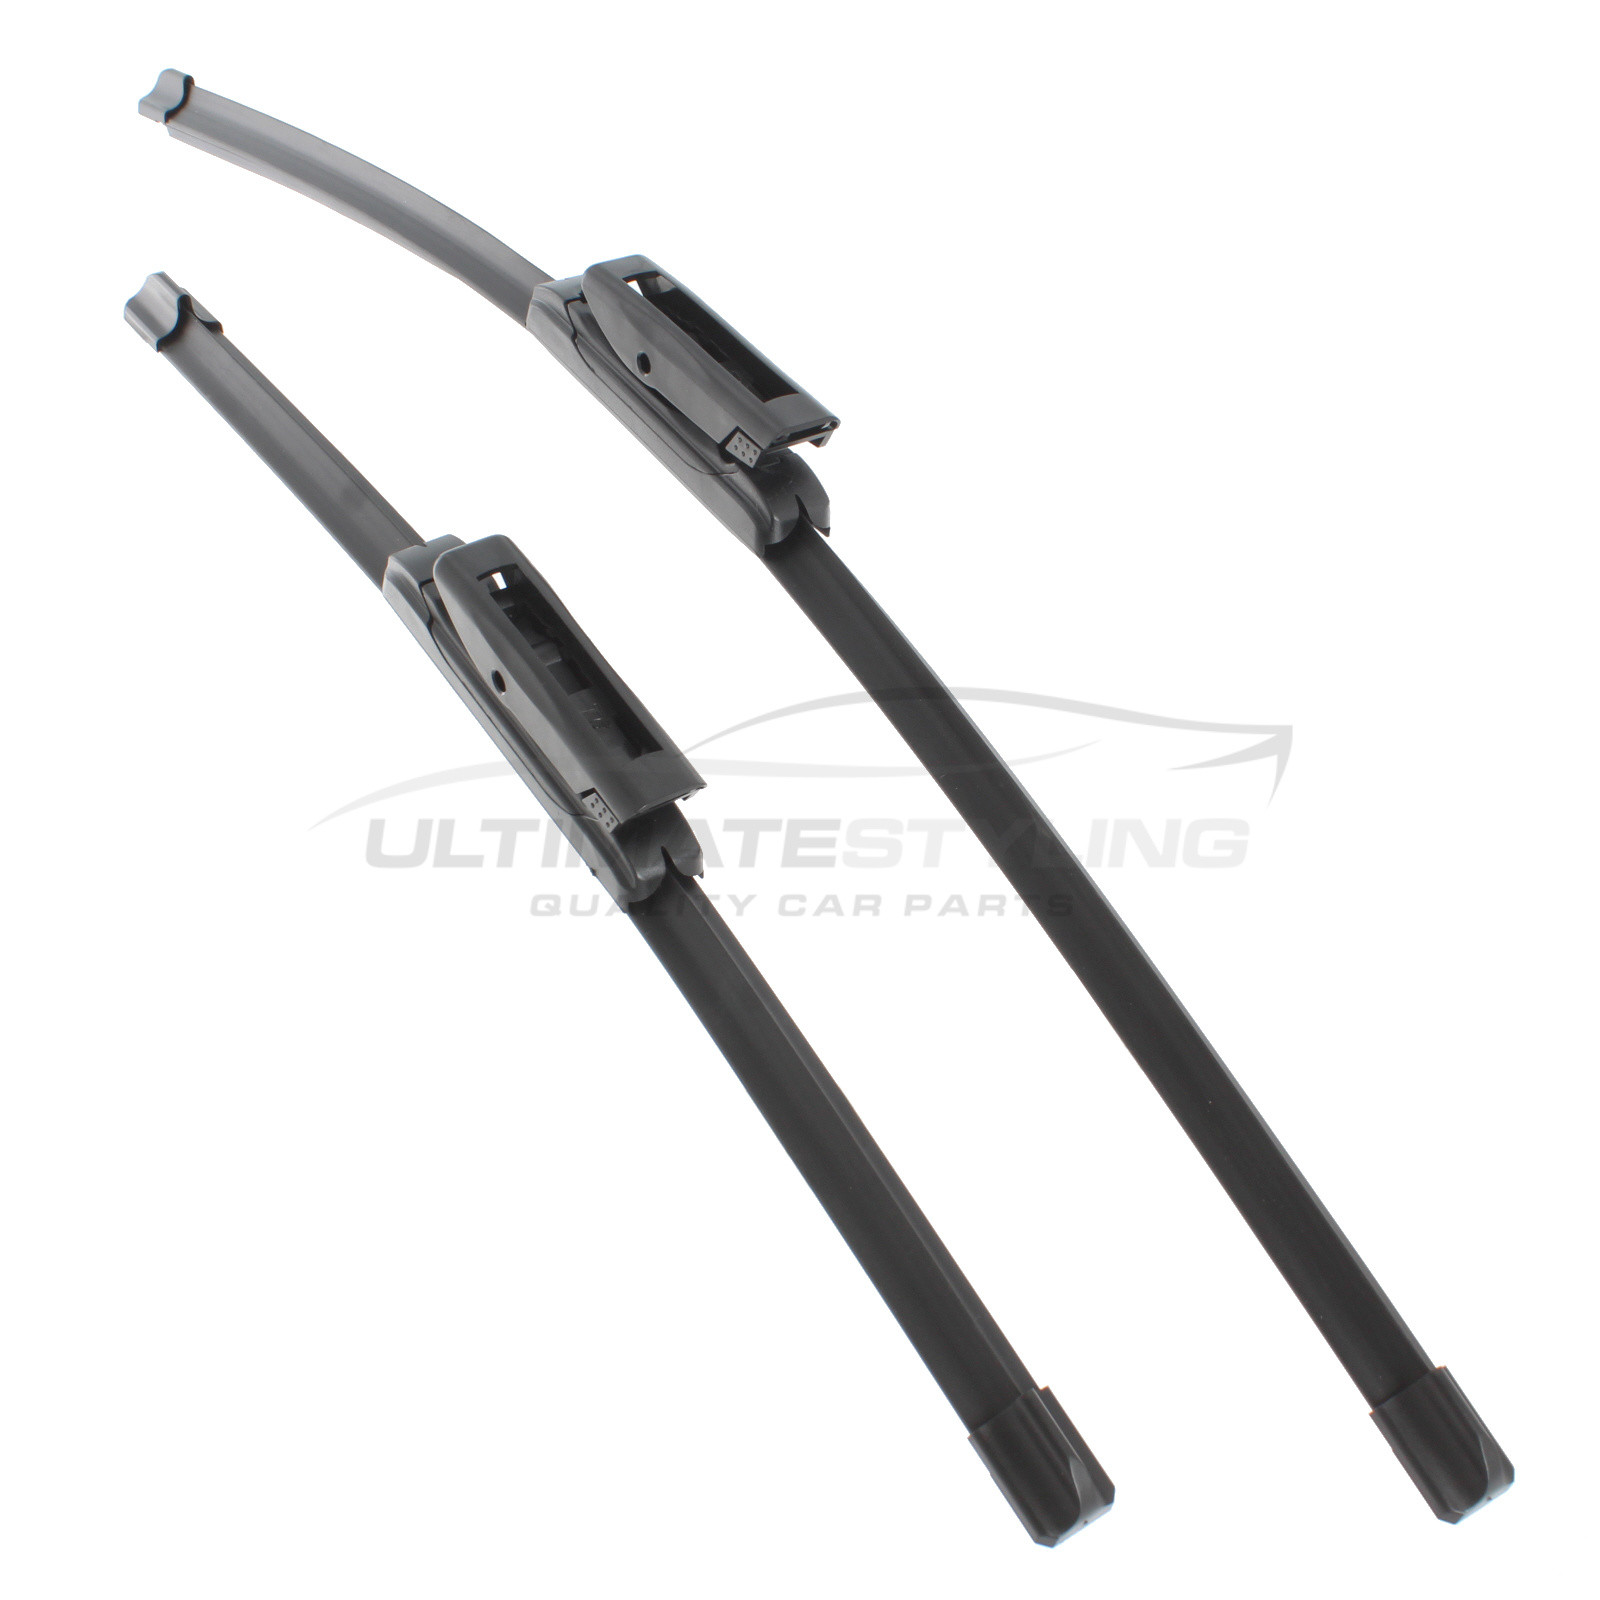 Drivers Side & Passenger Side (Front) Wiper Blades for Renault Clio